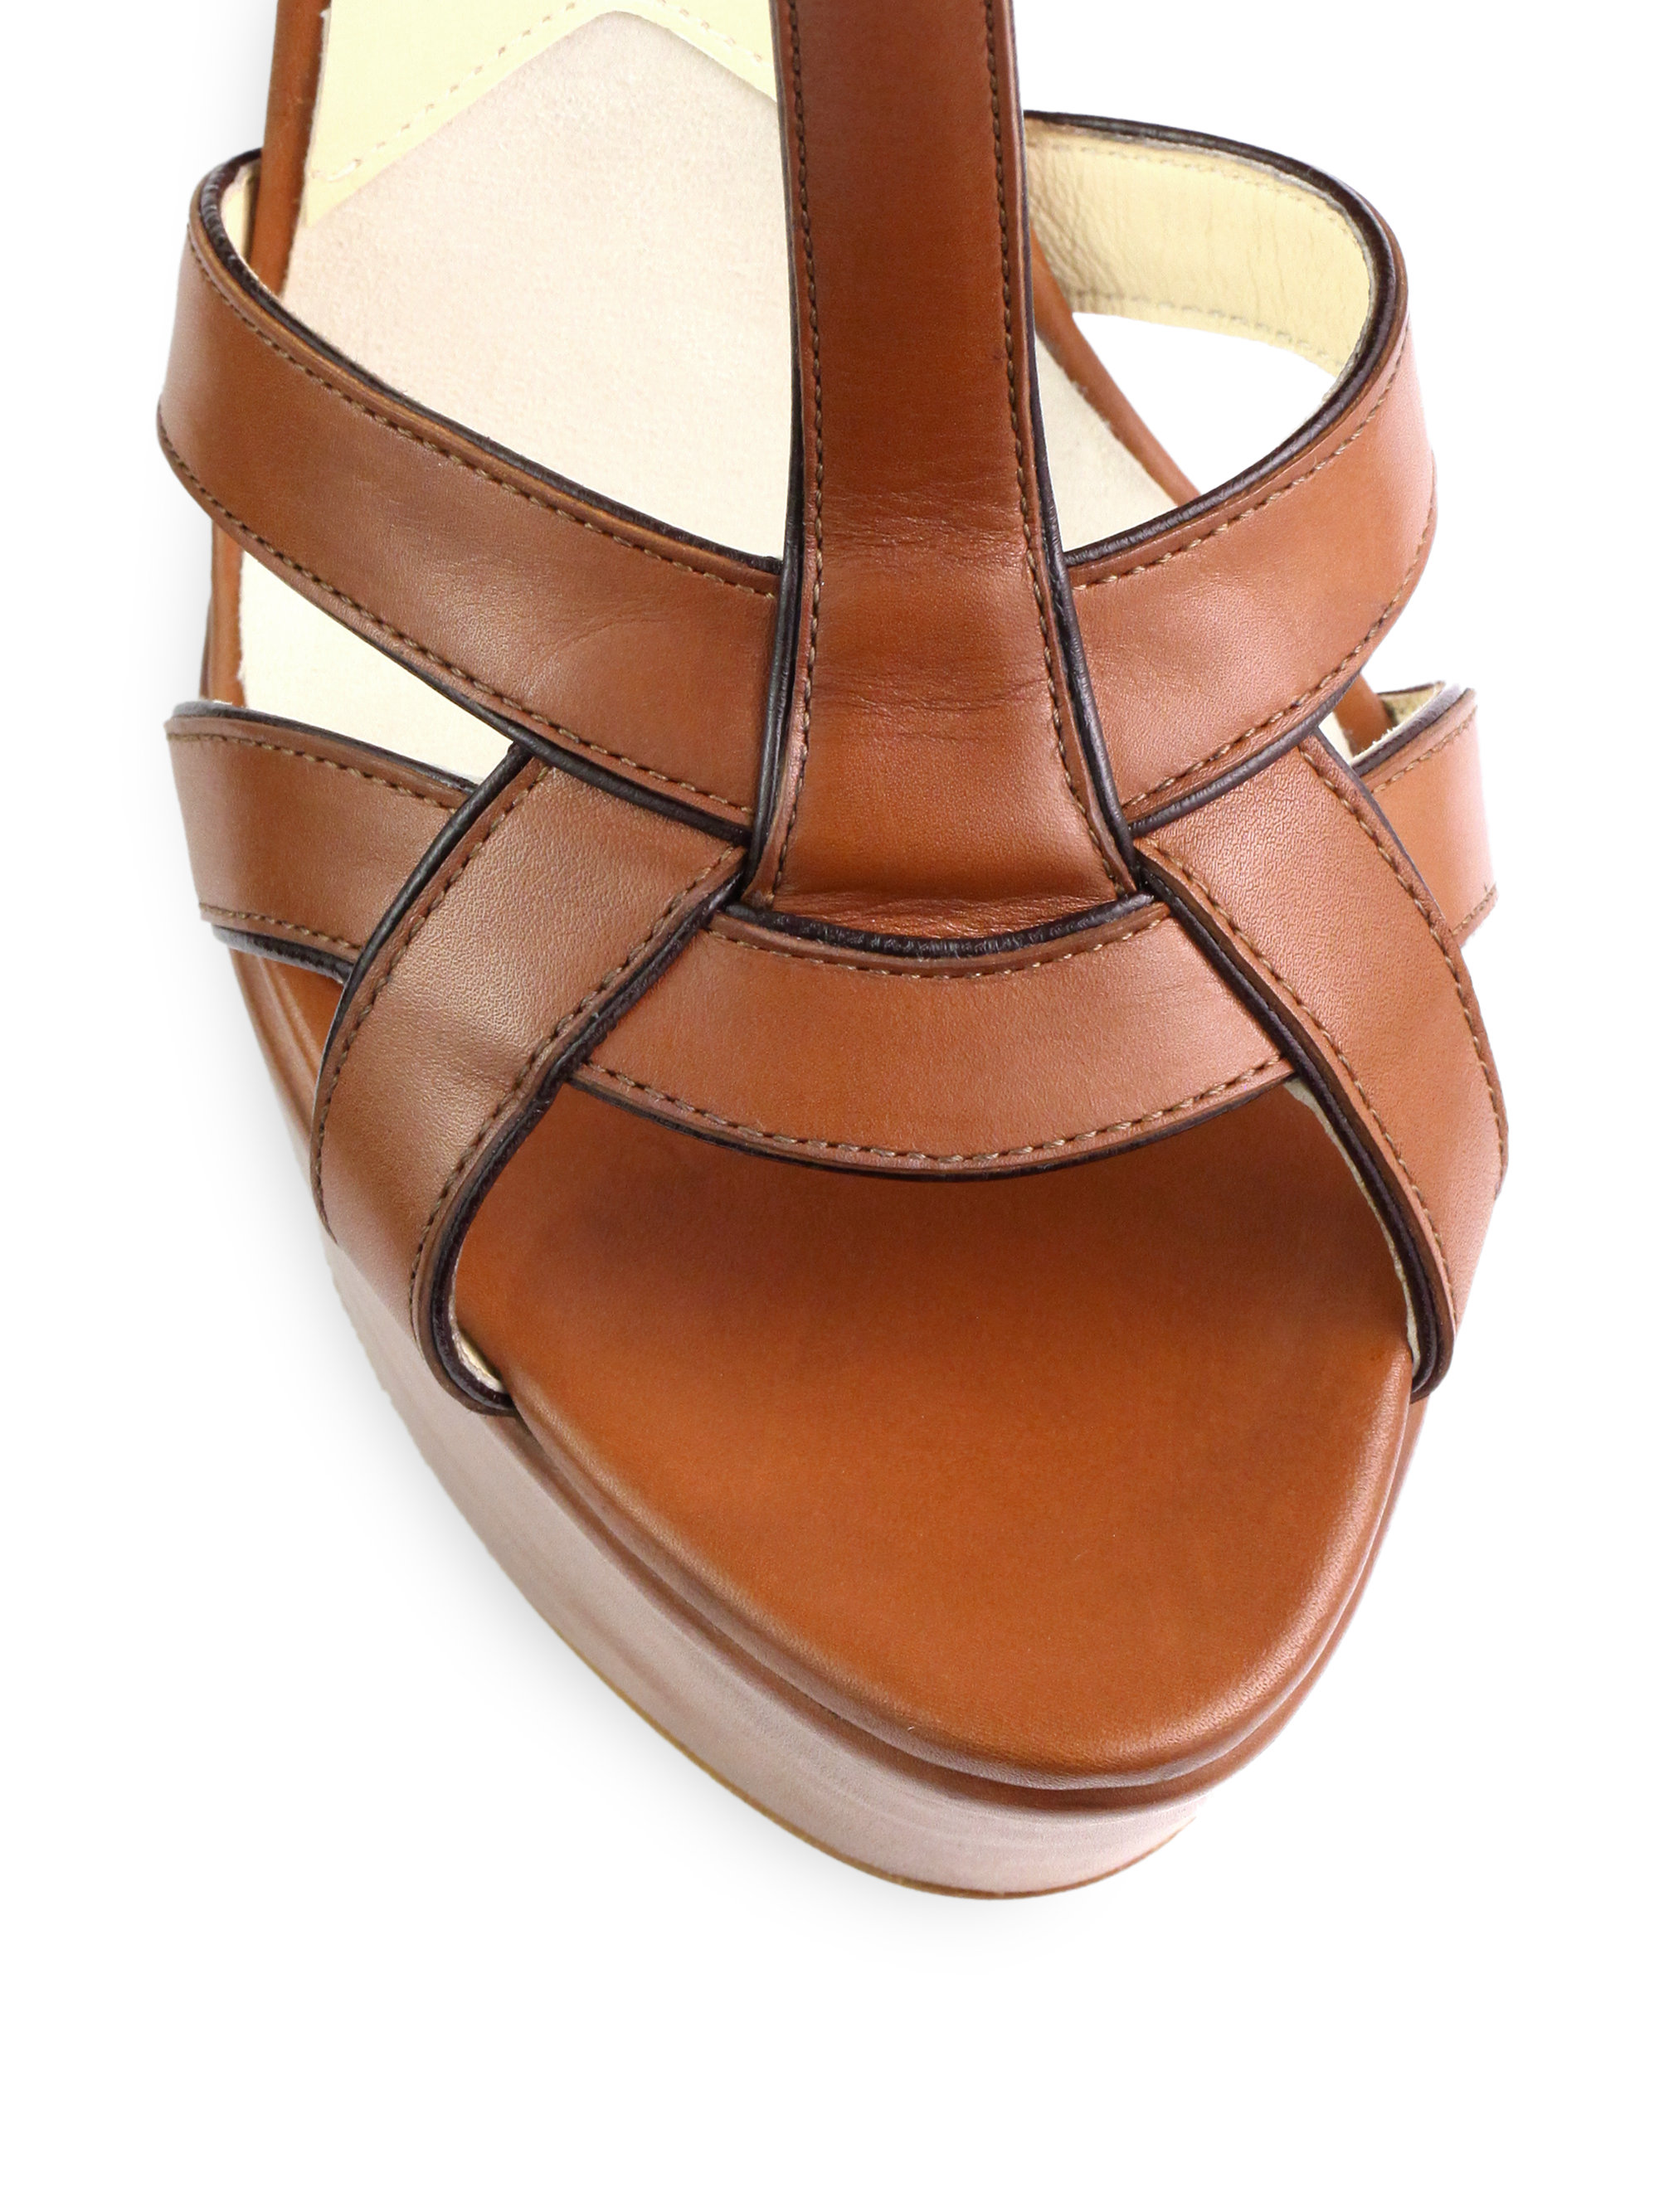 Lyst Brian Atwood Sema Leather Wedge Sandals In Brown